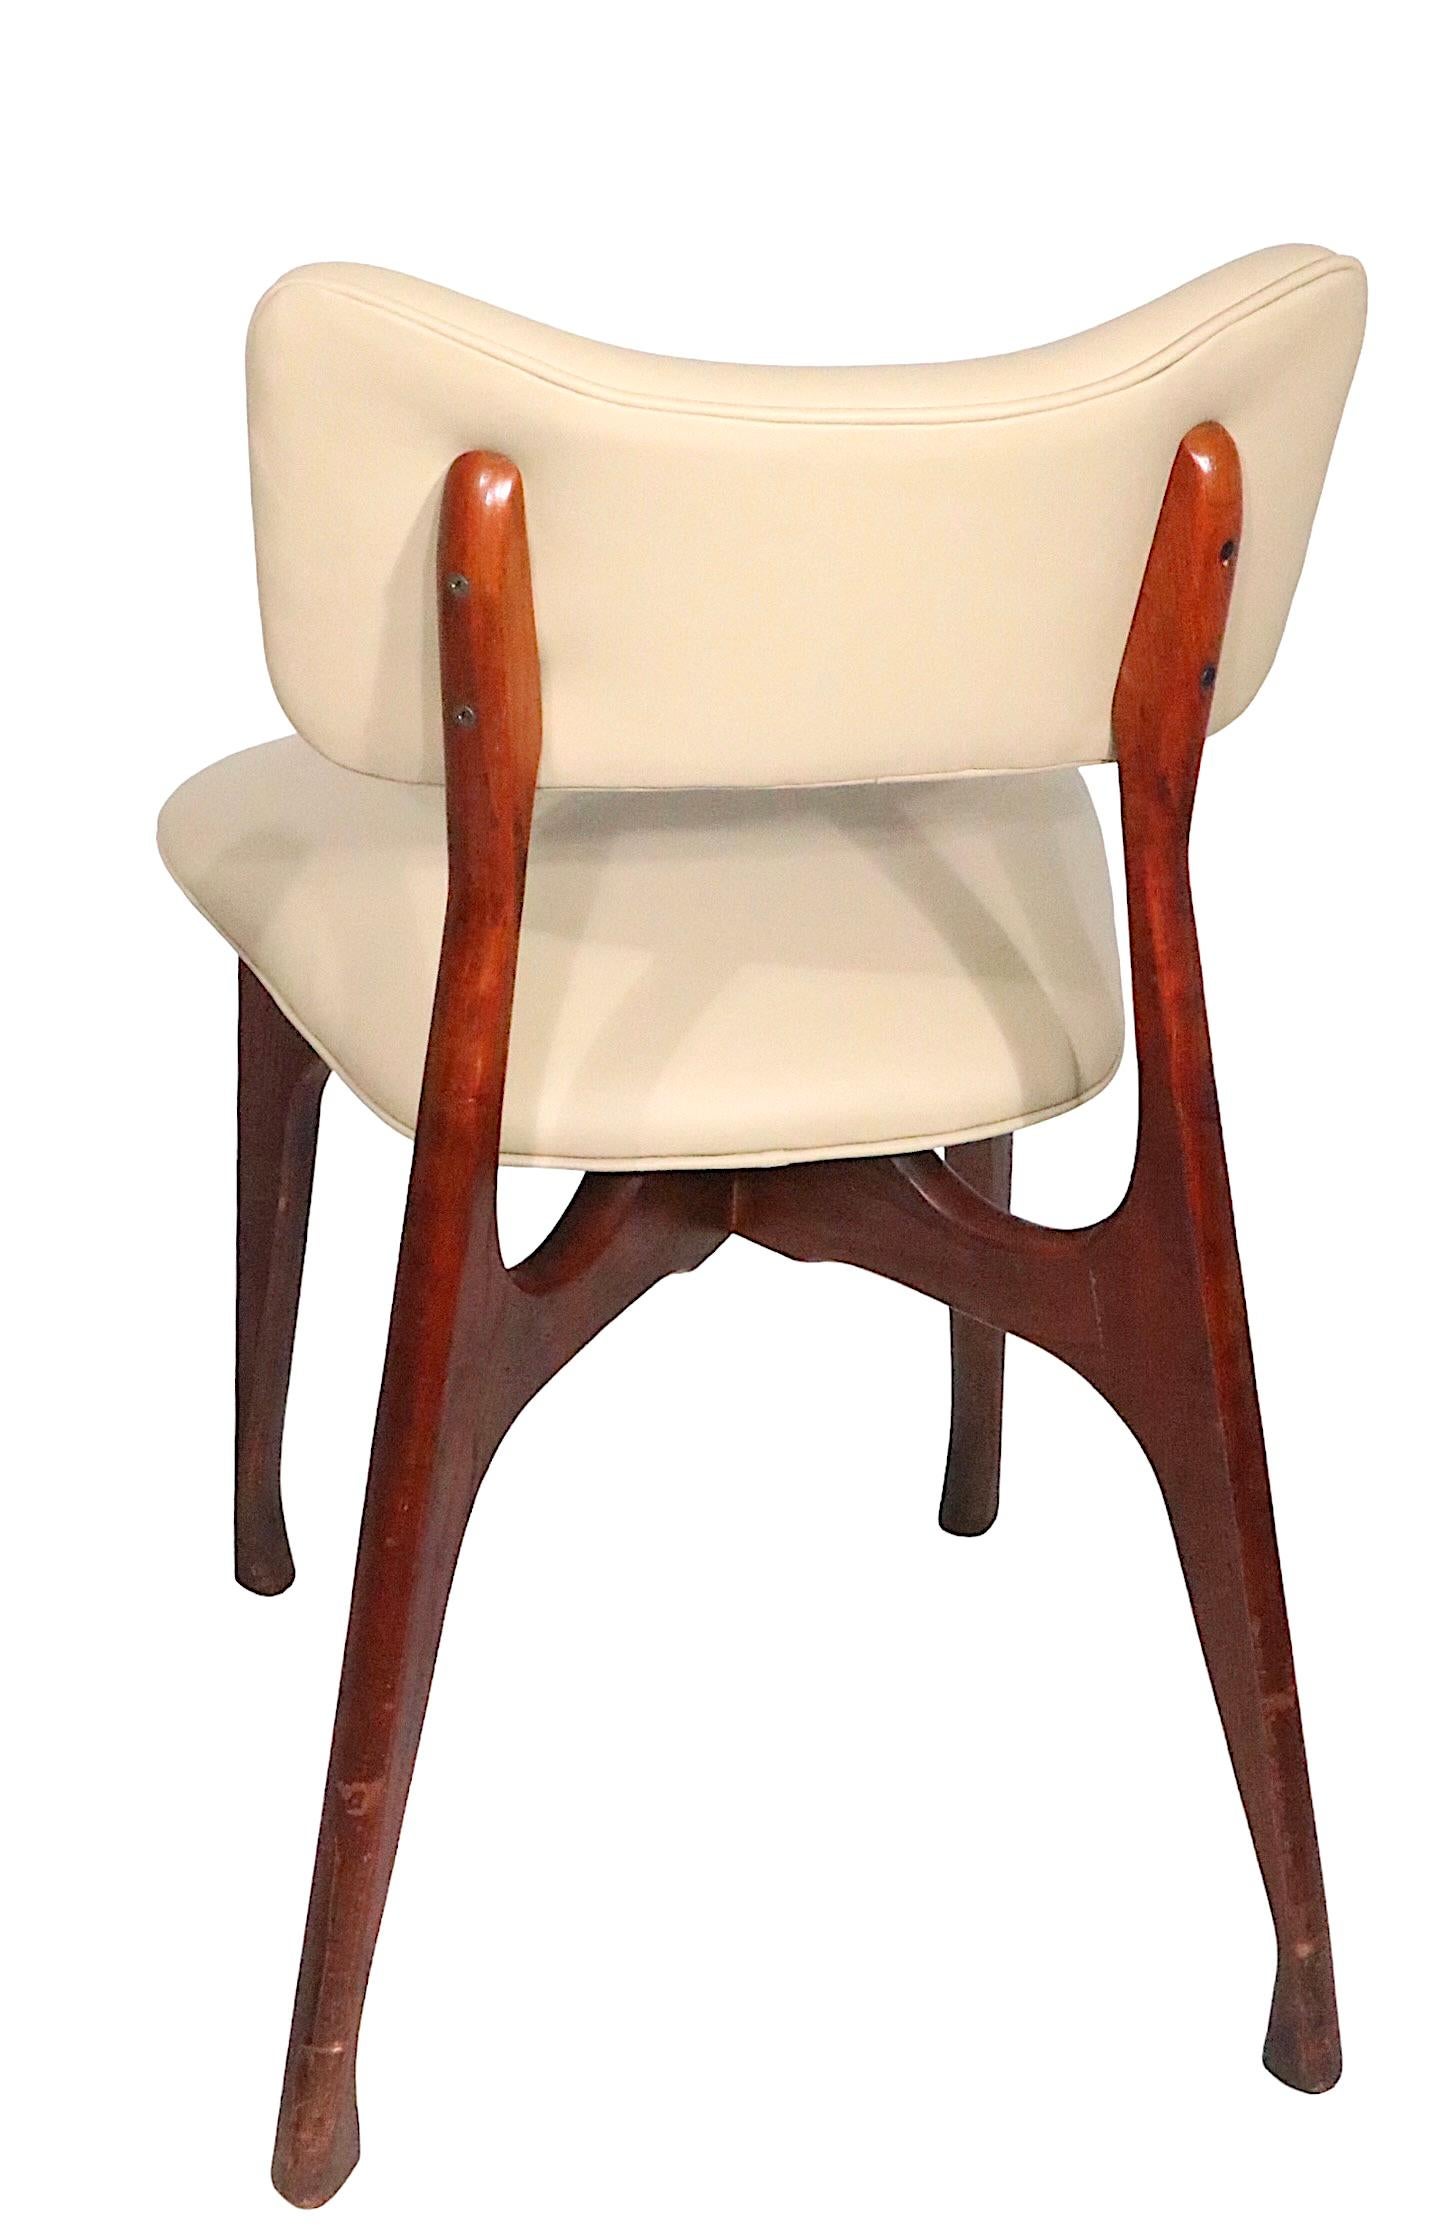 Pr. Midcentury Dining Side Chairs Att. to Ico Parisi, circa 1950s For Sale 7